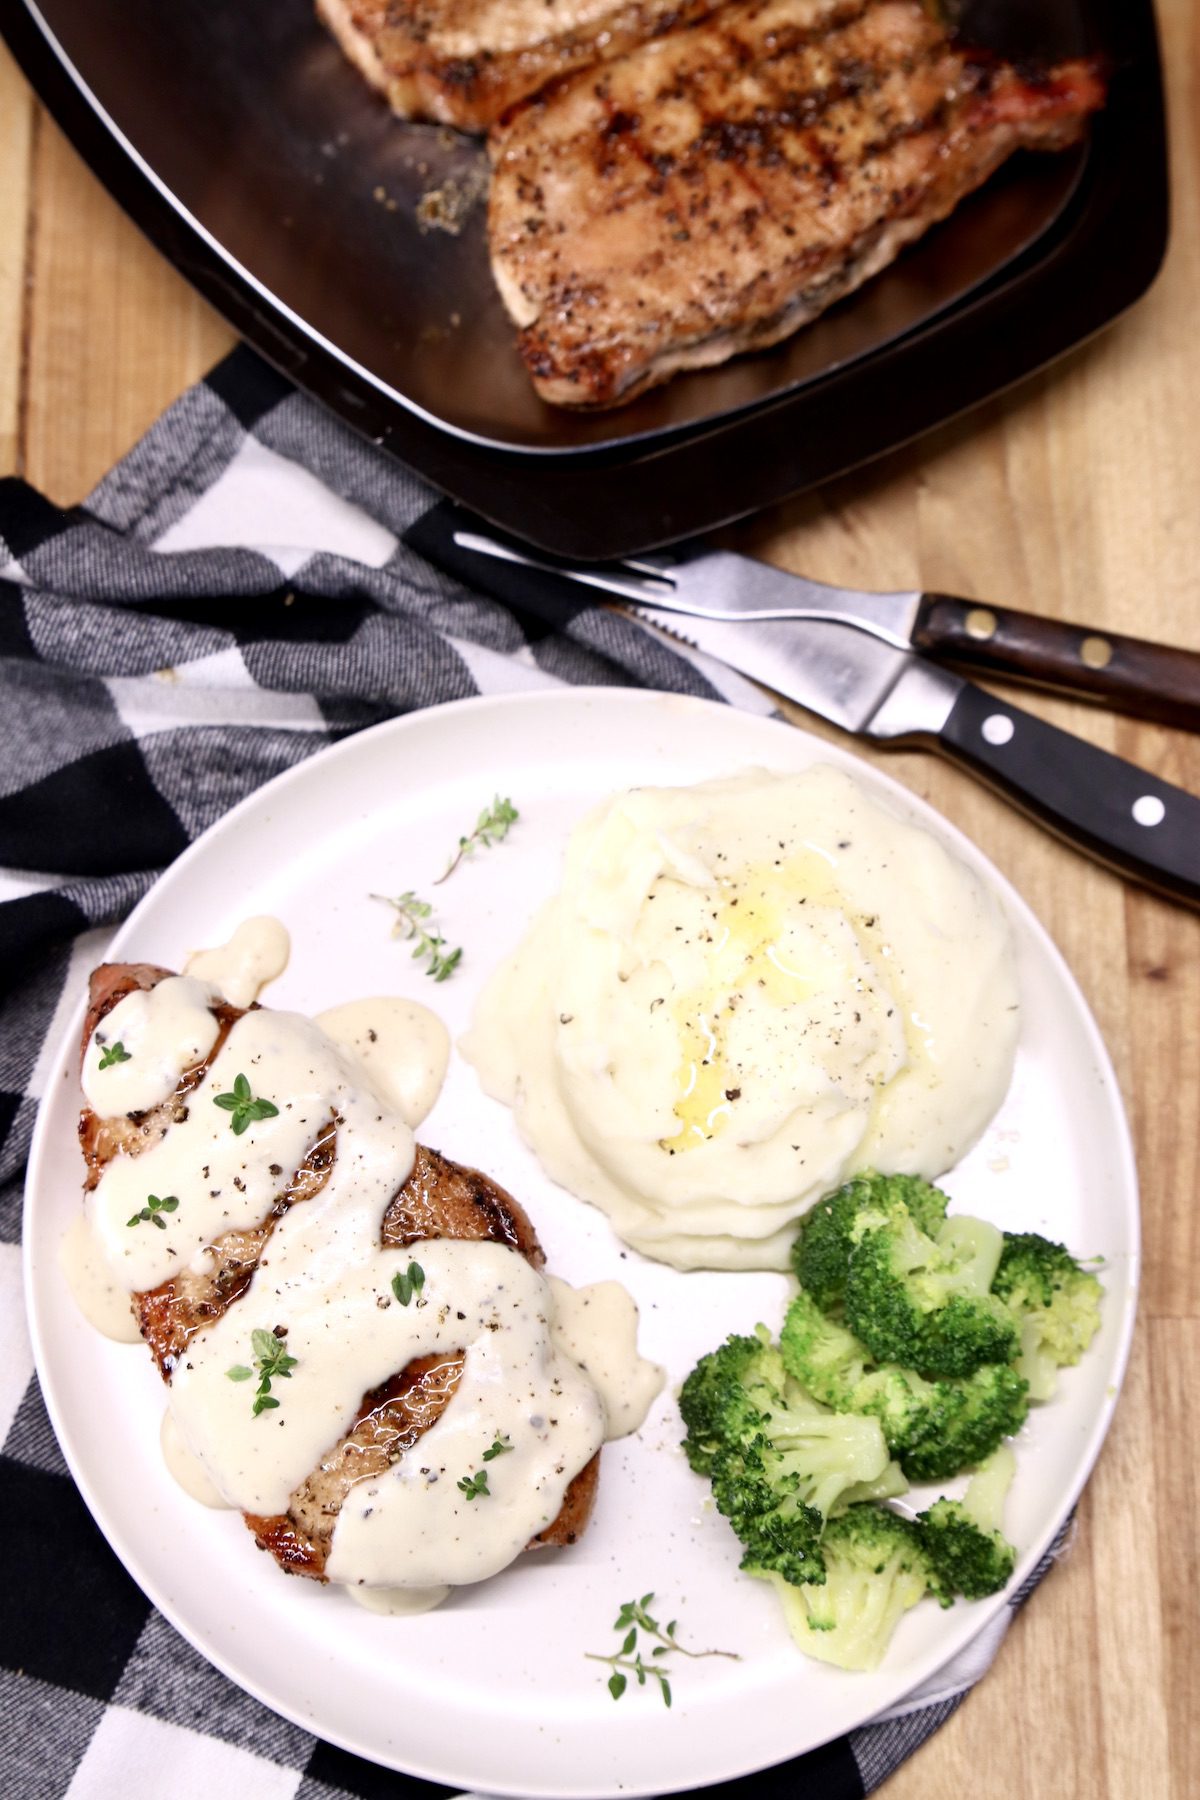 grilled pork chop on a plate with sour cream gravy, mashed potatoes and broccoli